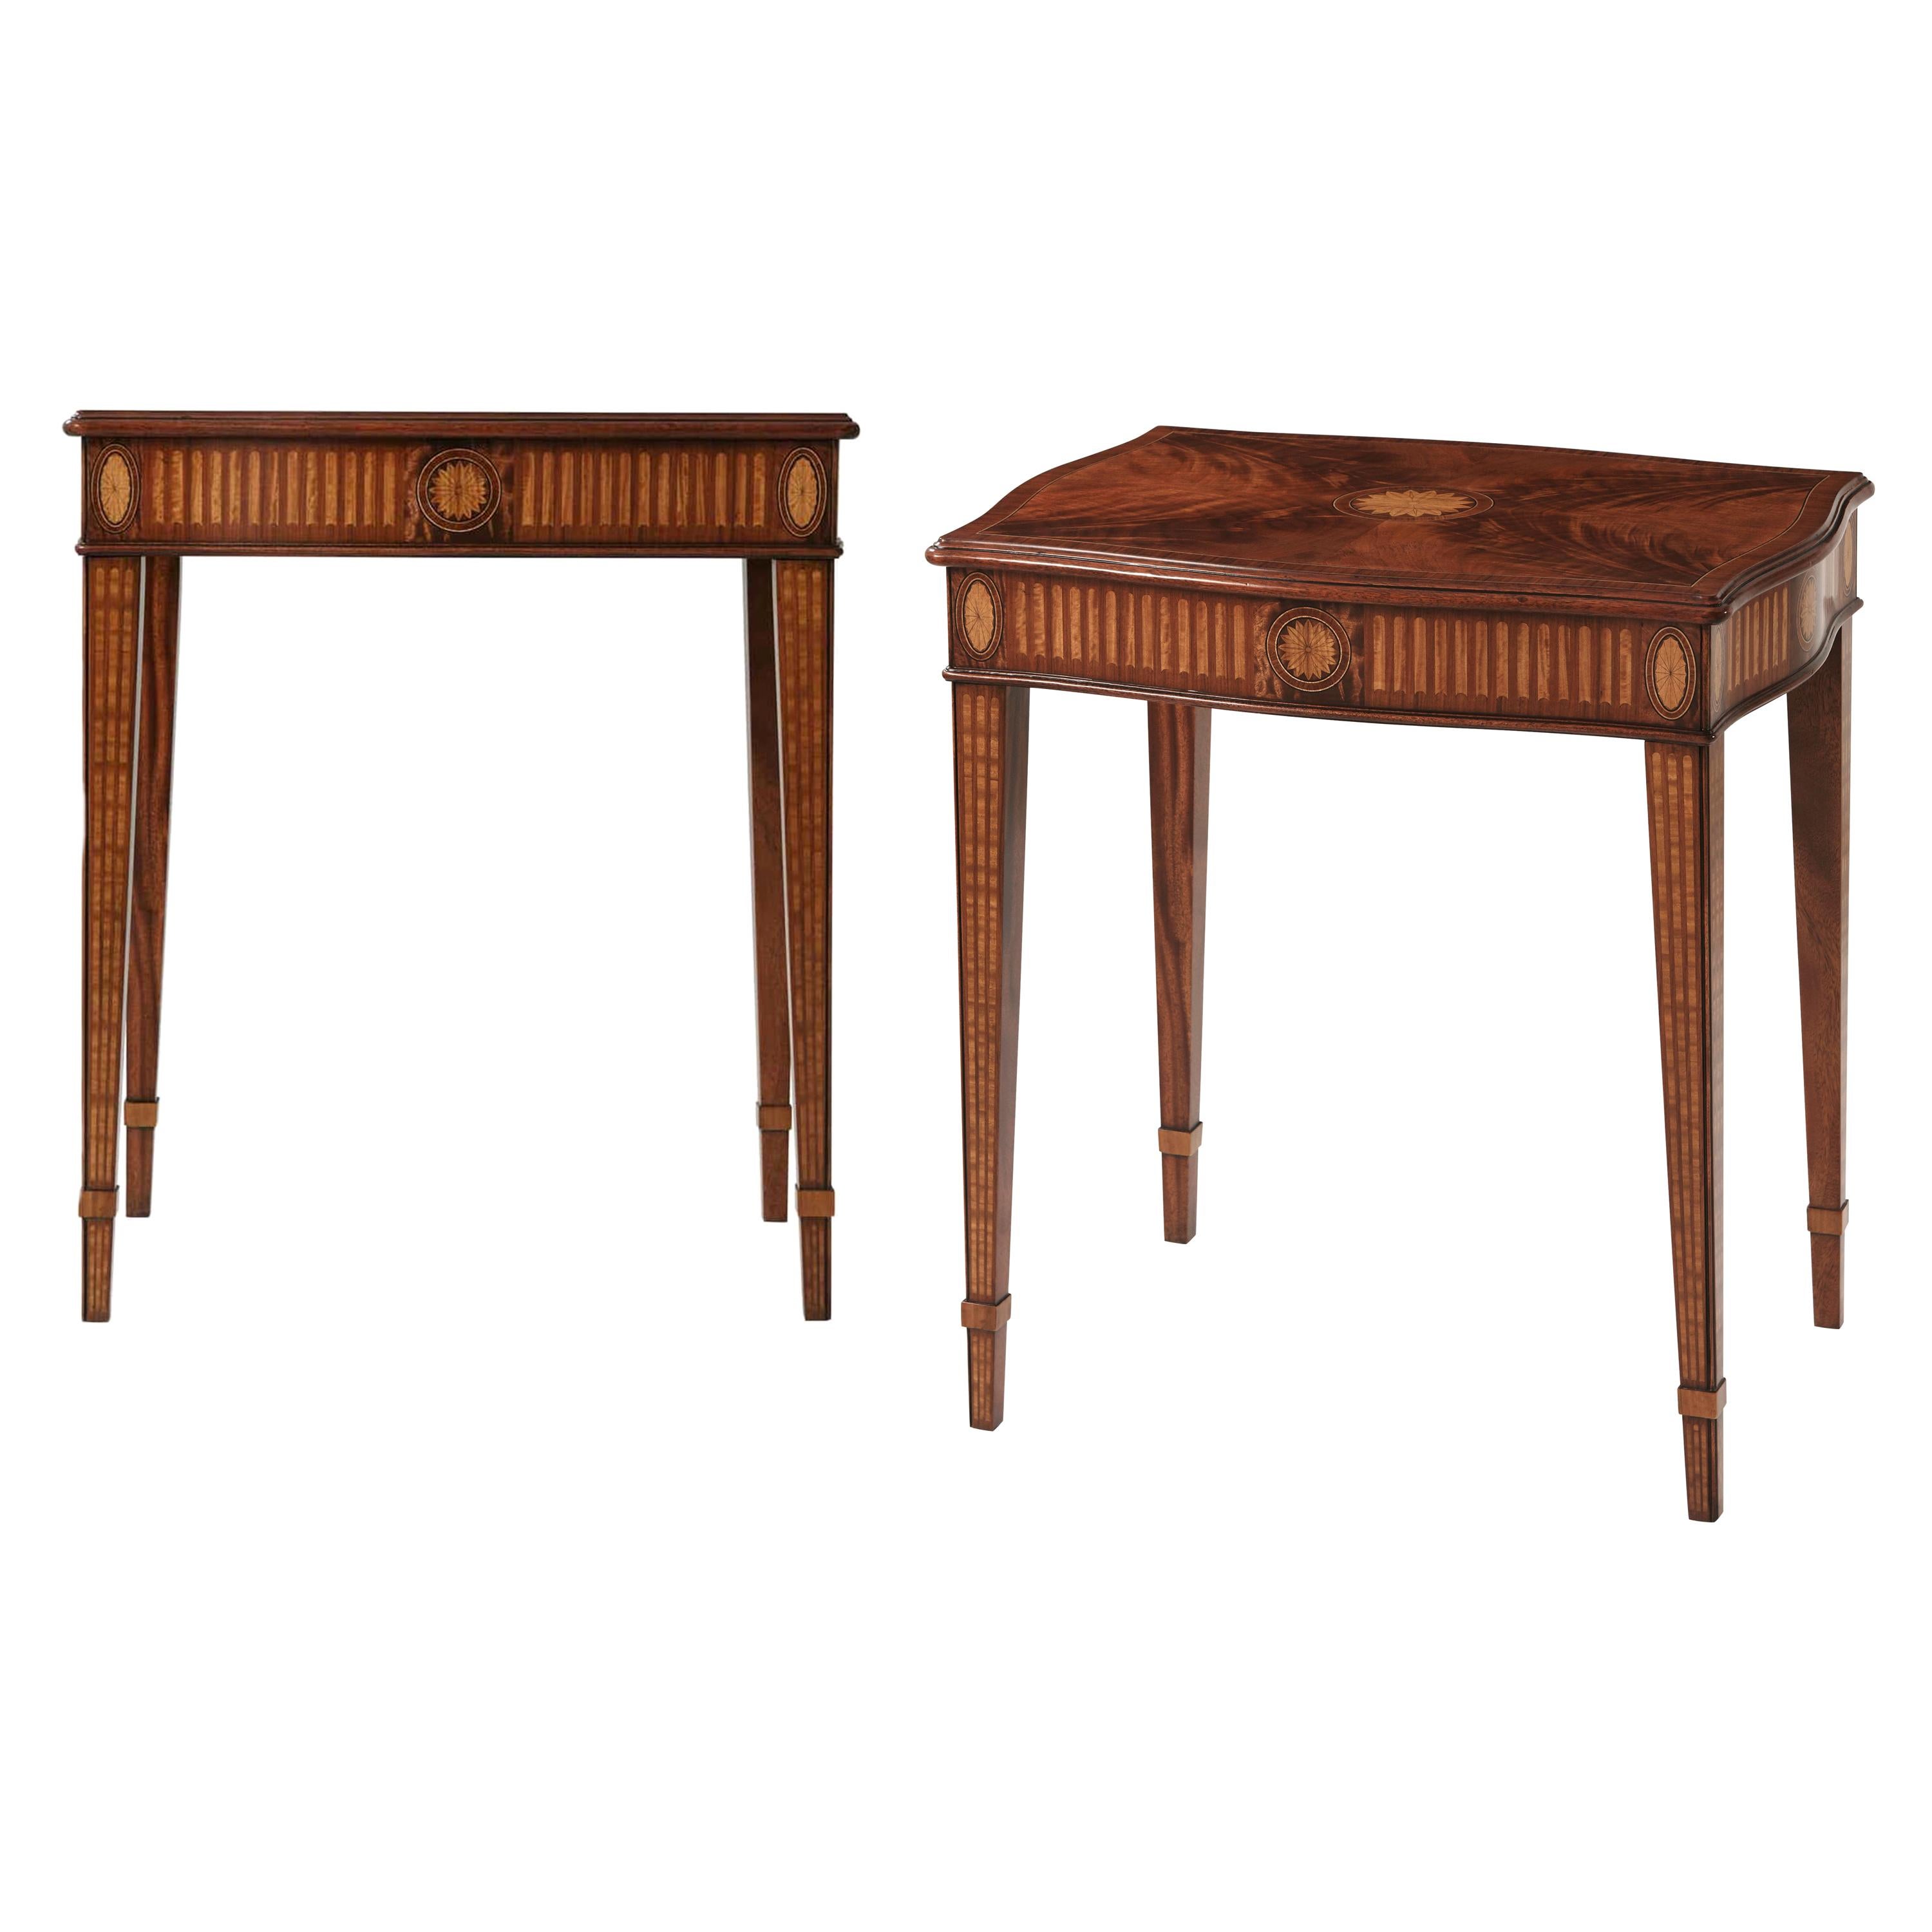 Pair of Hepplewhite Style Side Tables